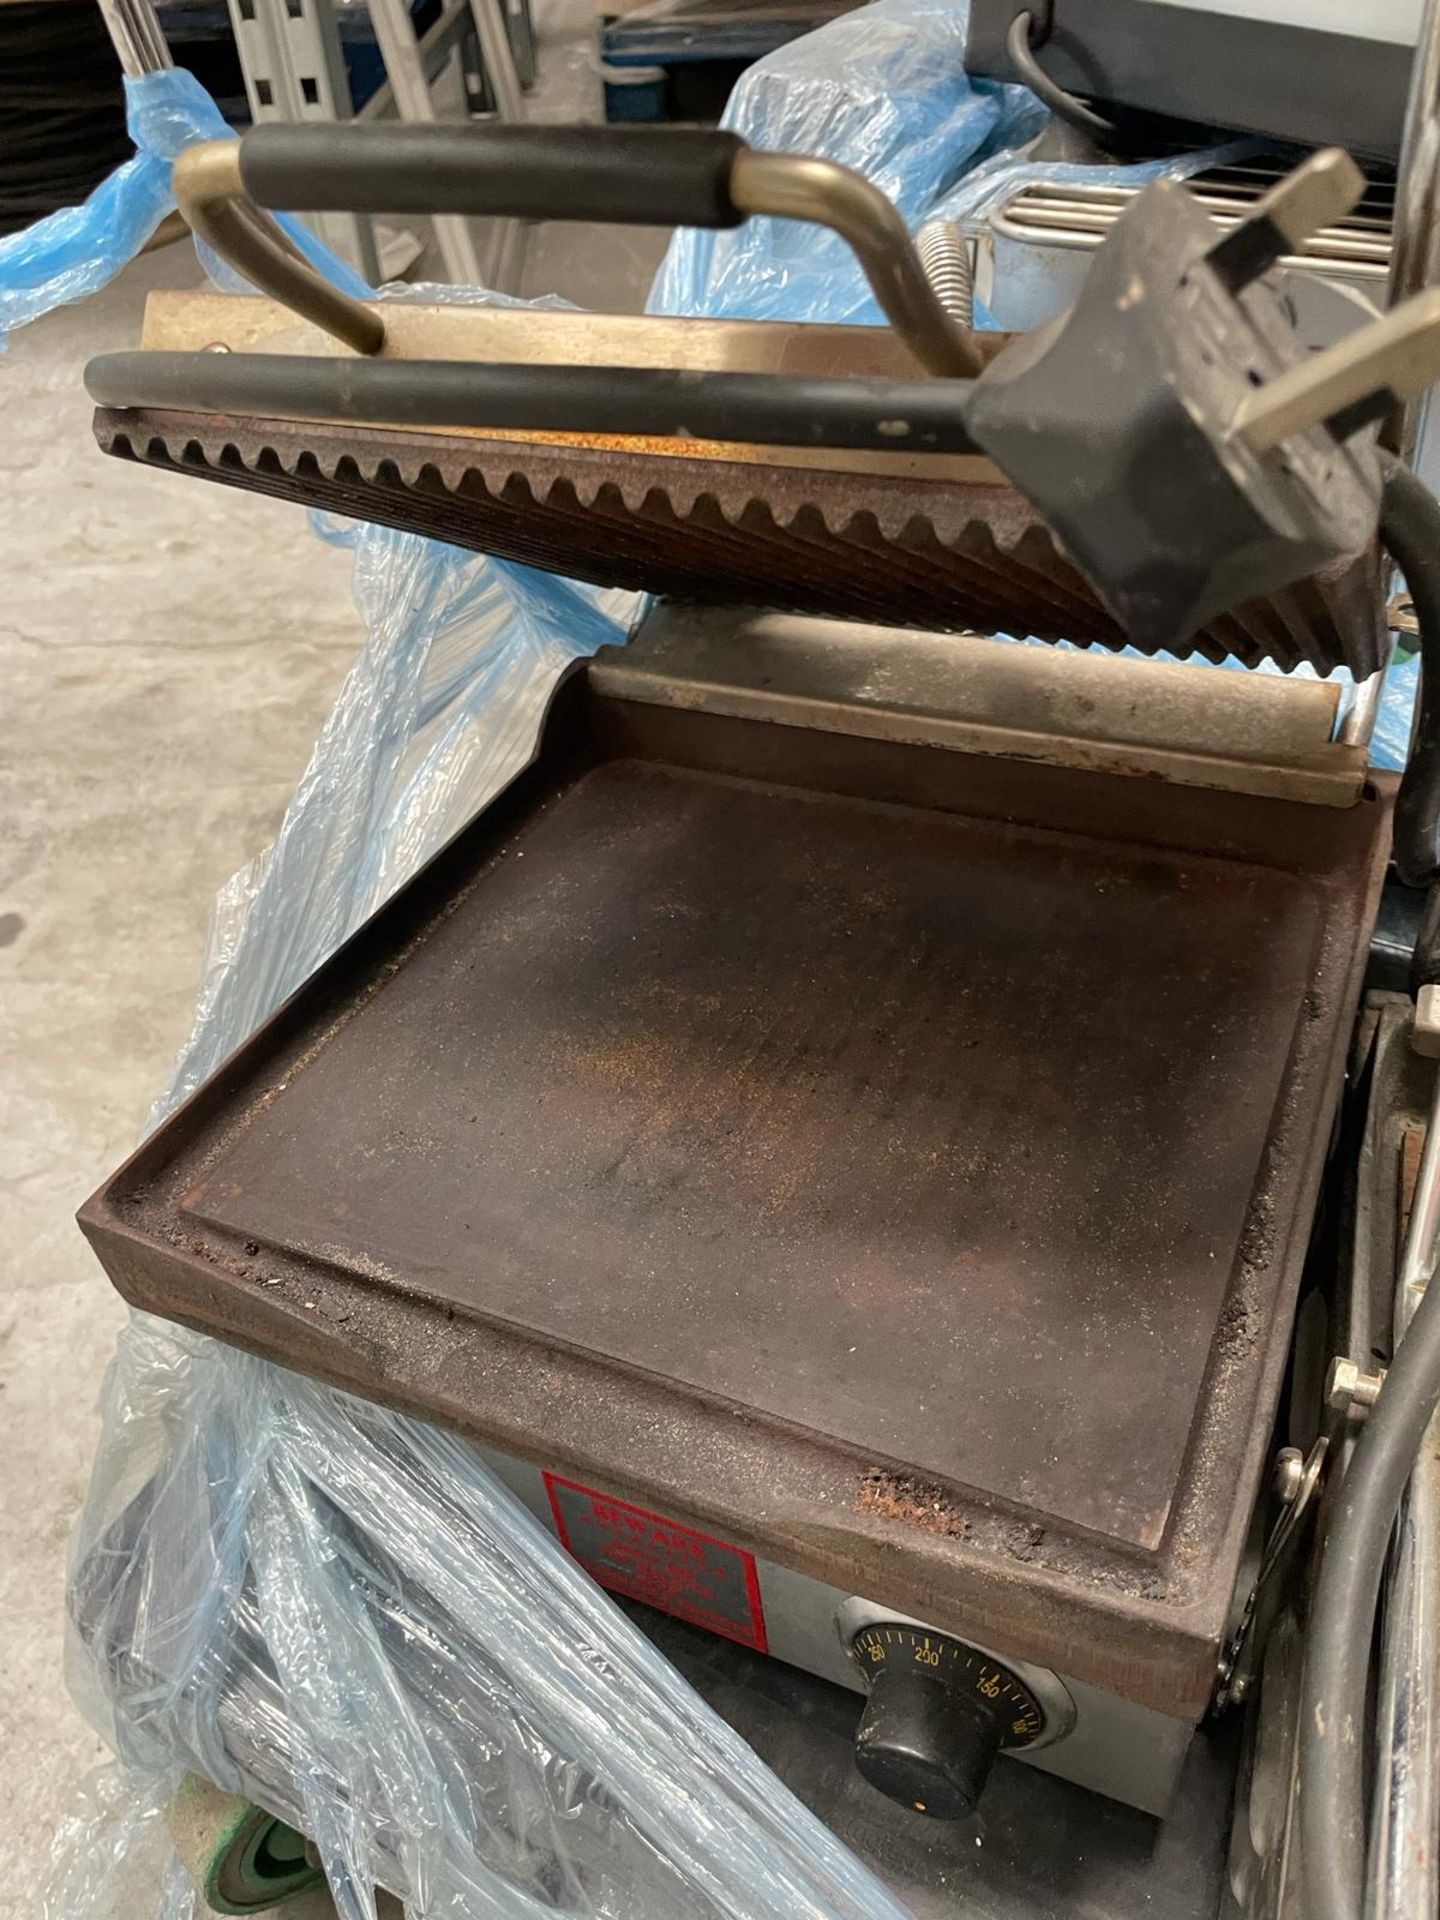 Buffalo 1 x Hot plate 1 x ridged griddle. 250 x 250 mm. Please note this lot is located at Unit - Image 3 of 5